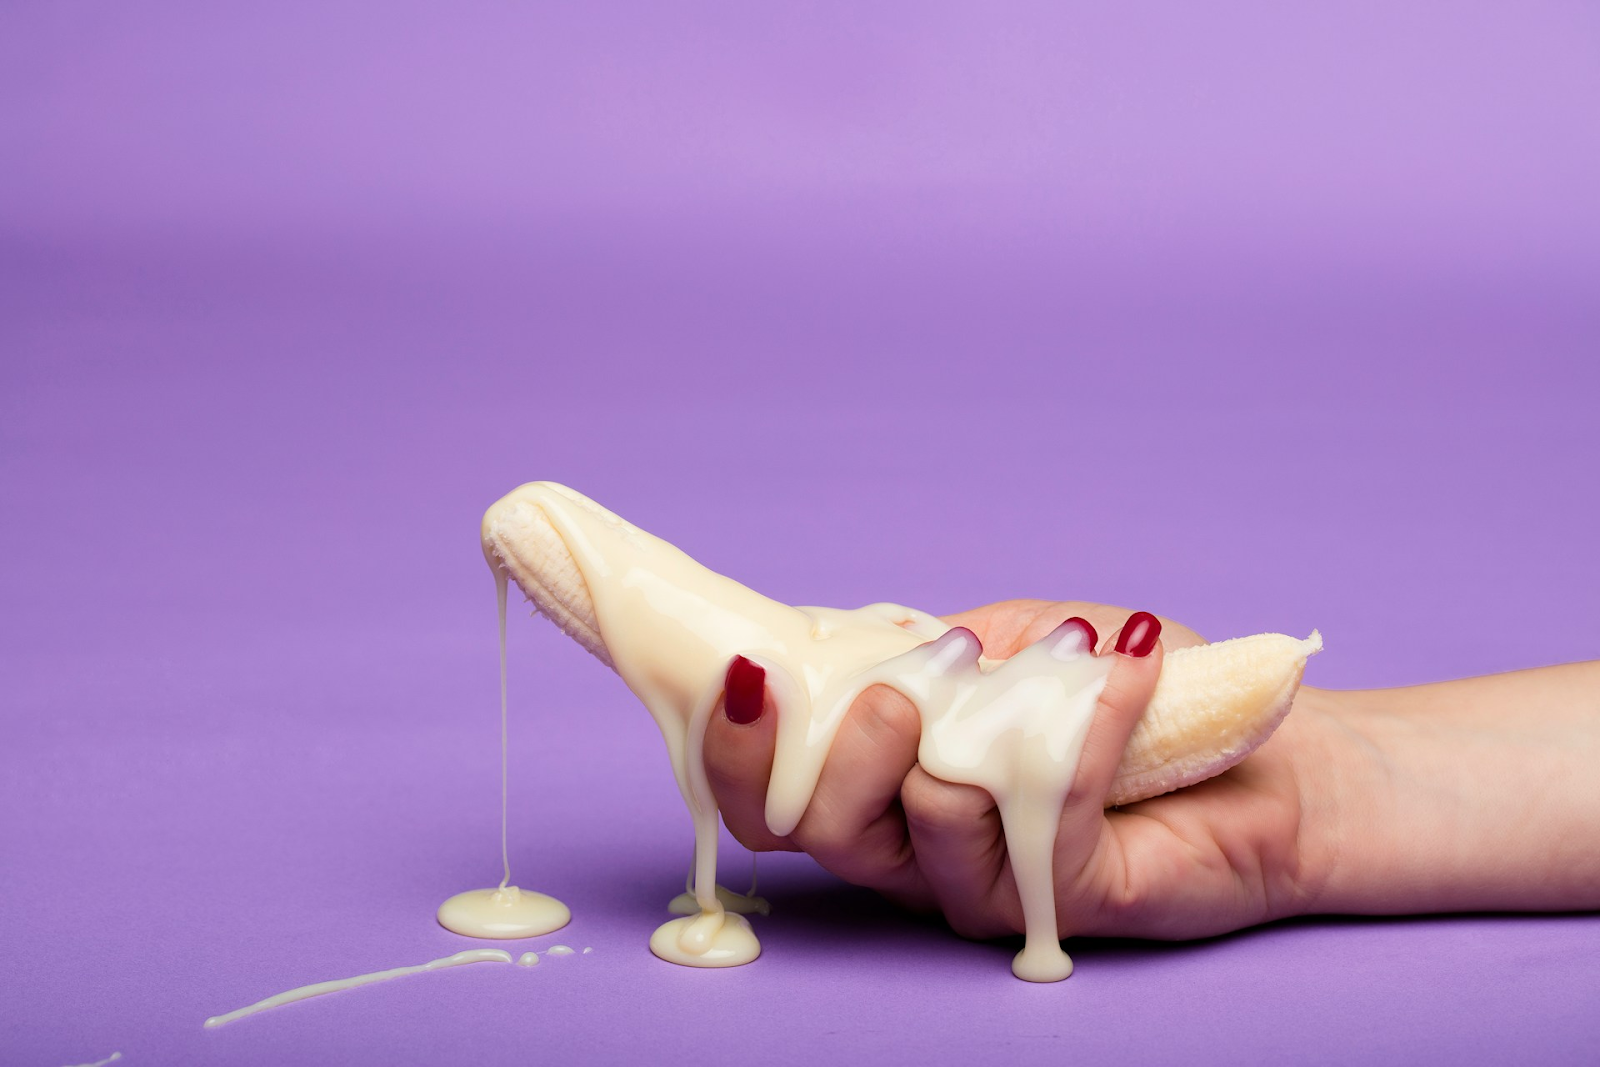 A woman holds a banana covered in drippy yoghurt - sexual fruit representing premature ejaculation - A man stands awkwardly in an elevator next to an awkward woman - https://www.pexels.com/photo/a-man-and-a-woman-standing-next-to-each-other-9566326/